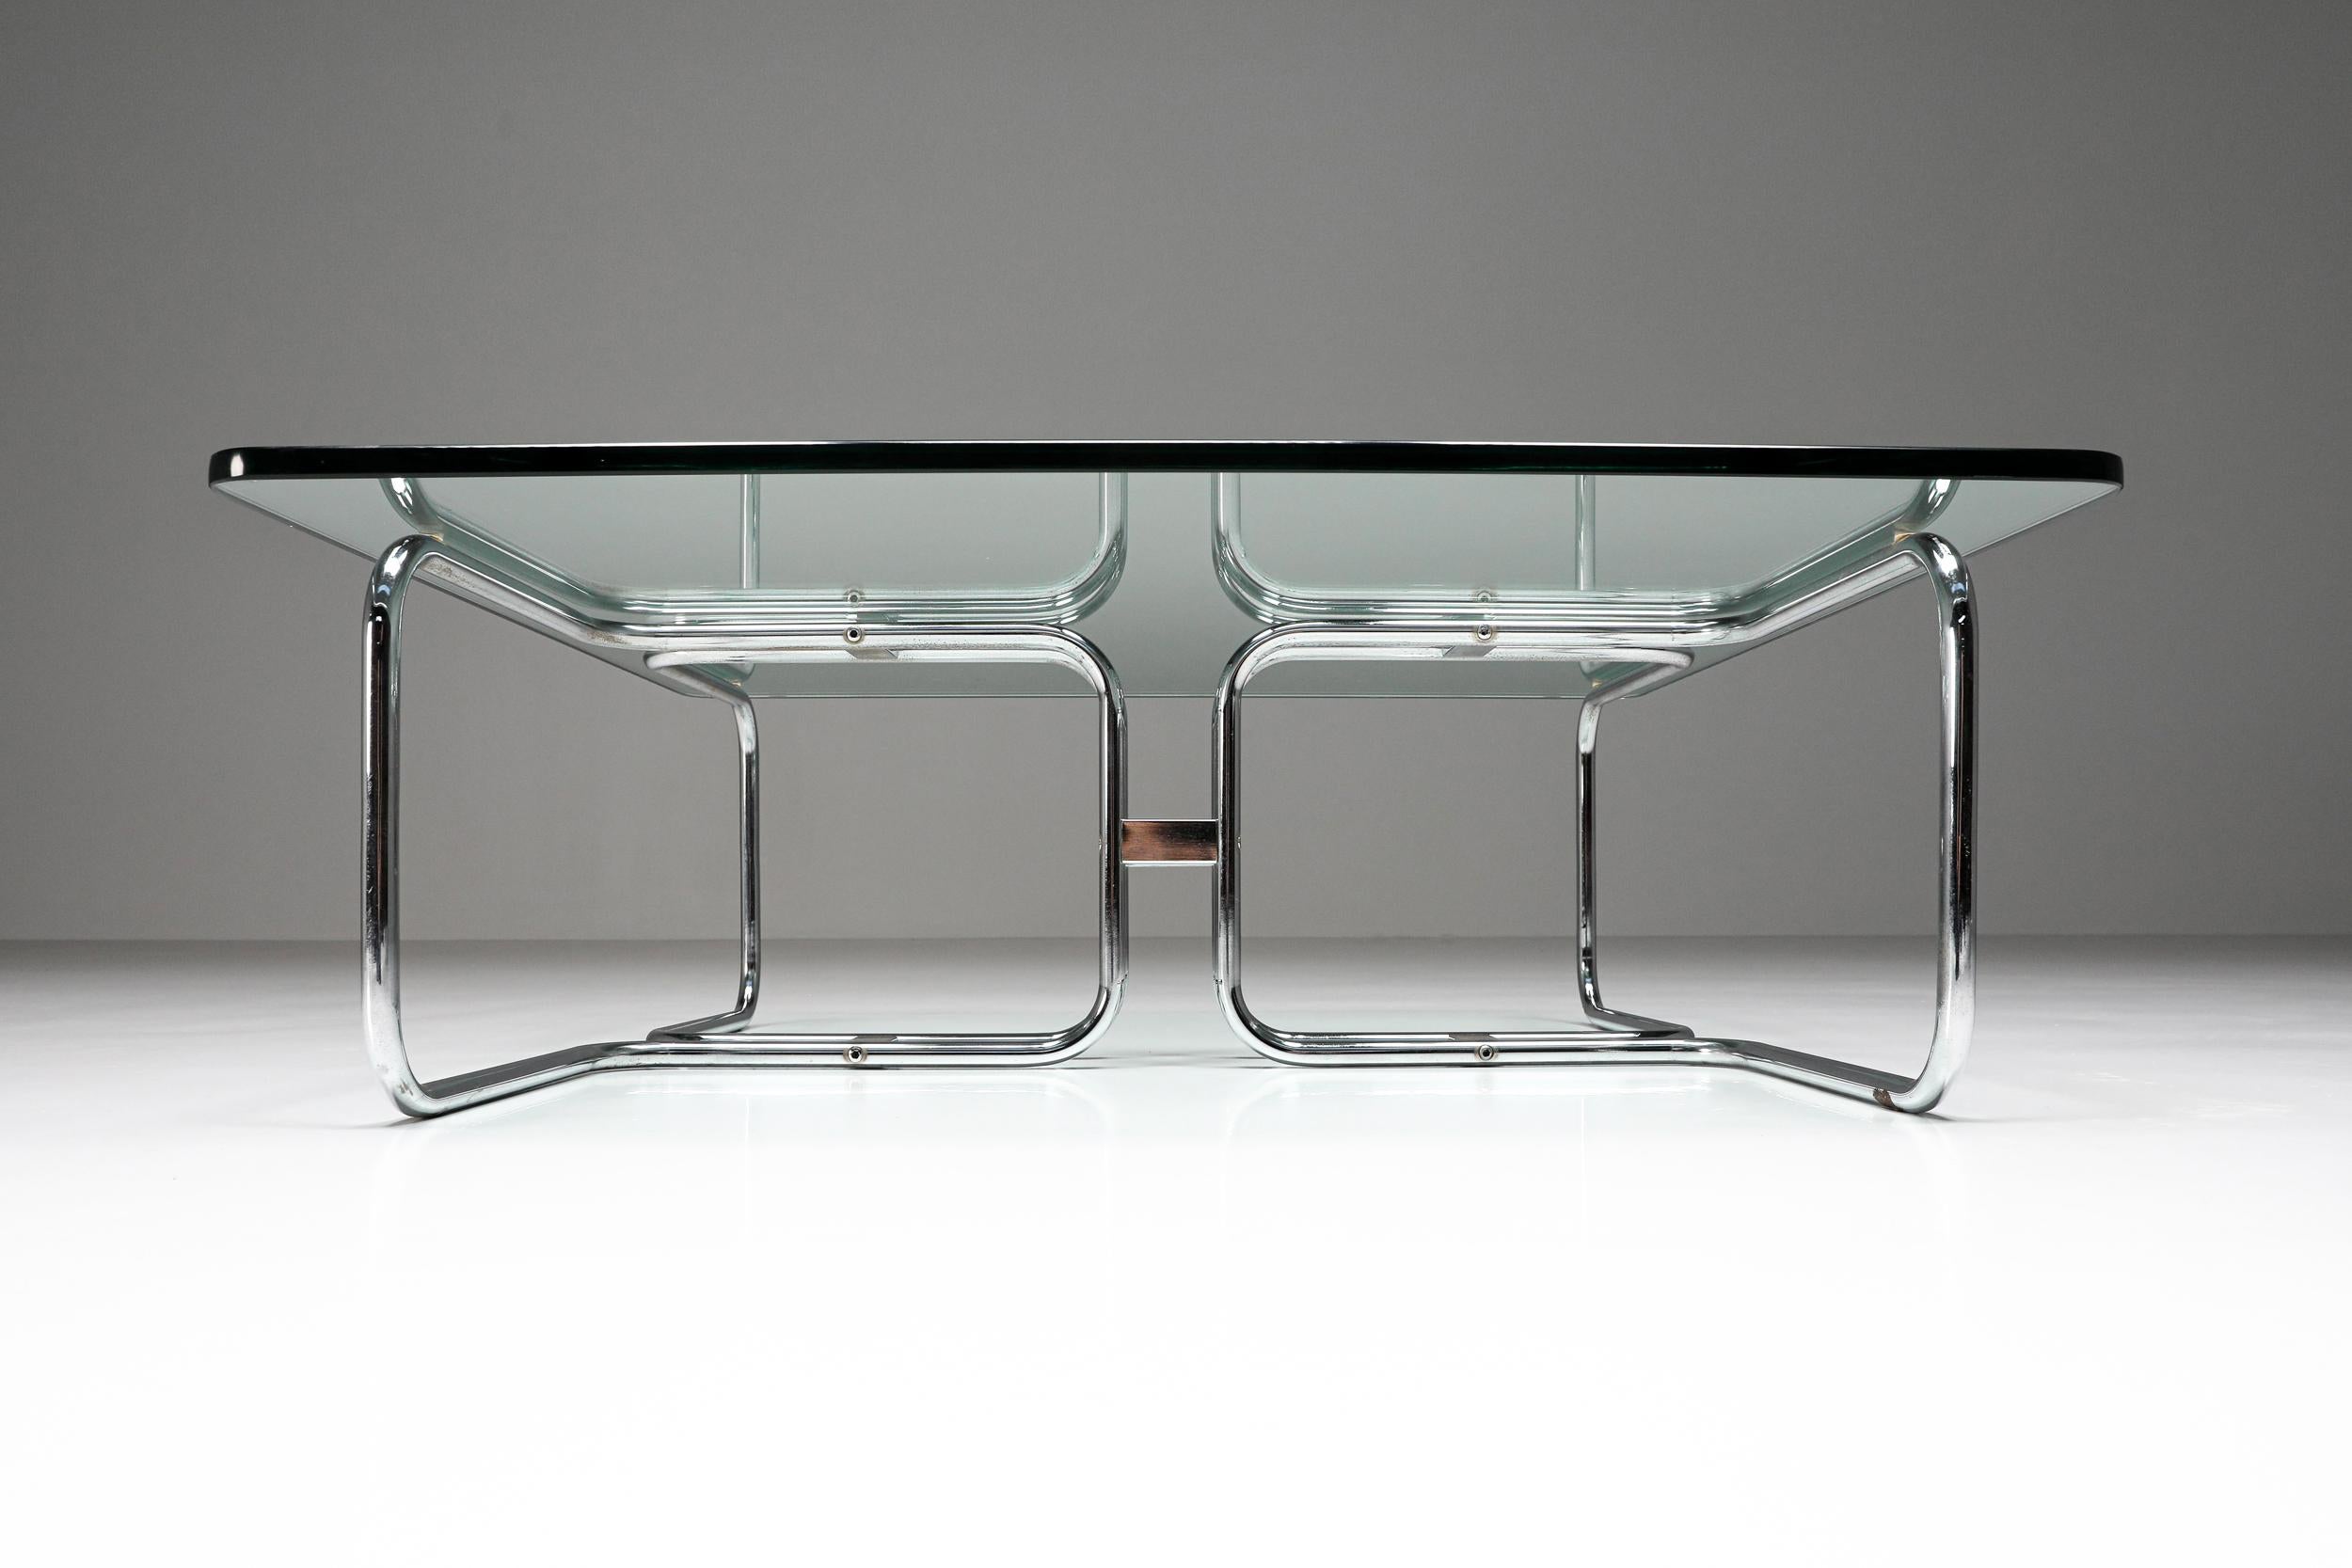 Late 20th Century Tucroma Coffee Table by Guido Faleschini for Pace Collection, Italian design